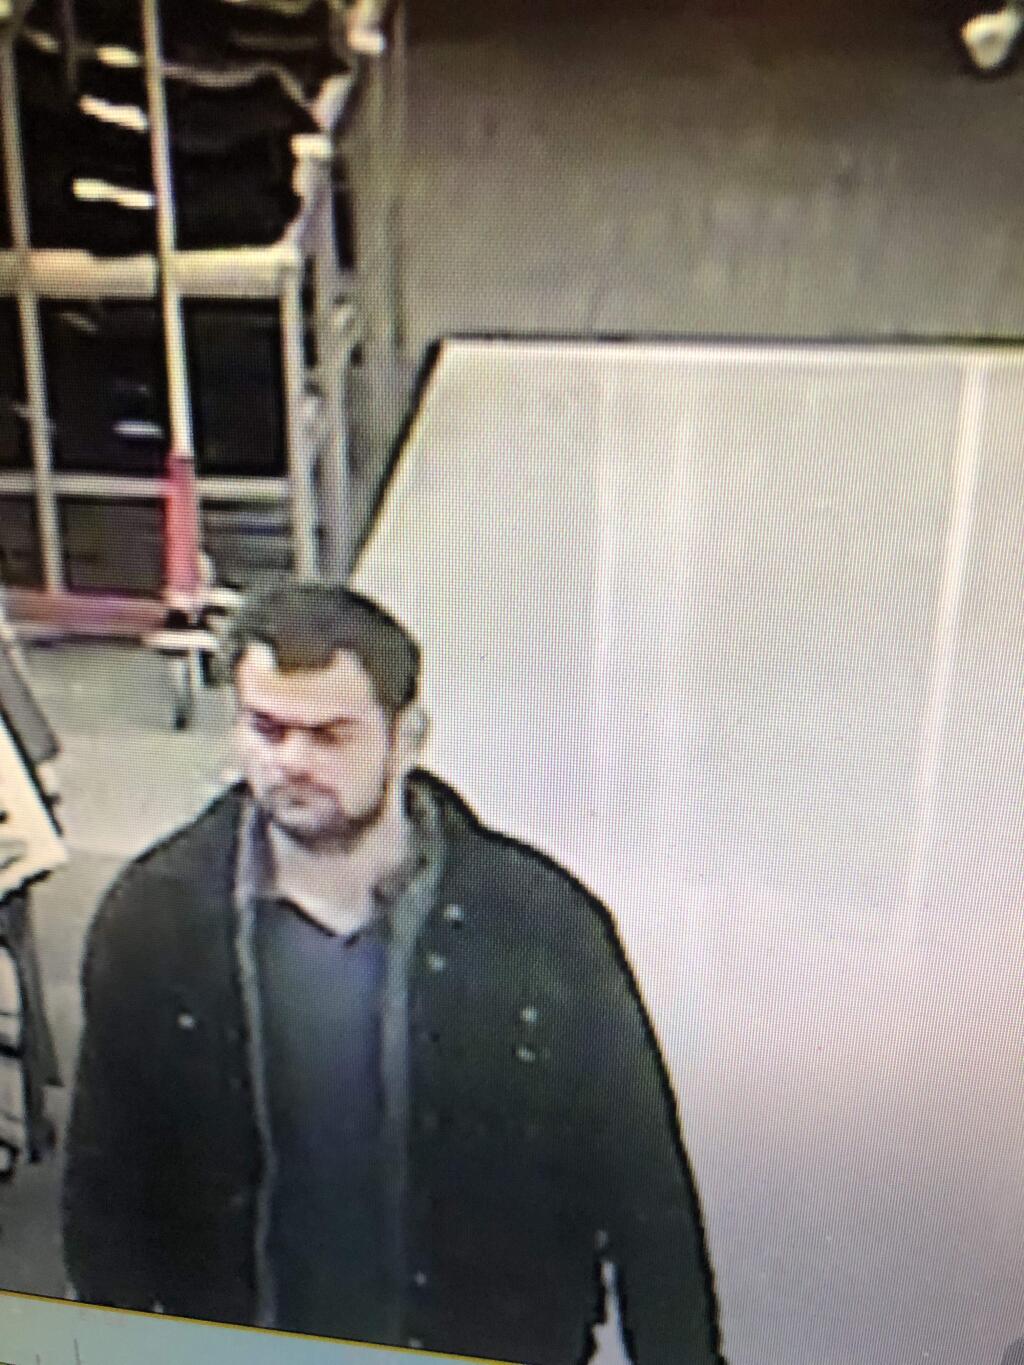 Petaluma police are looking for a man who they say punched a Target store employee and ran away after attempting to steal merchandise Friday evening. (Petaluma Police Department)